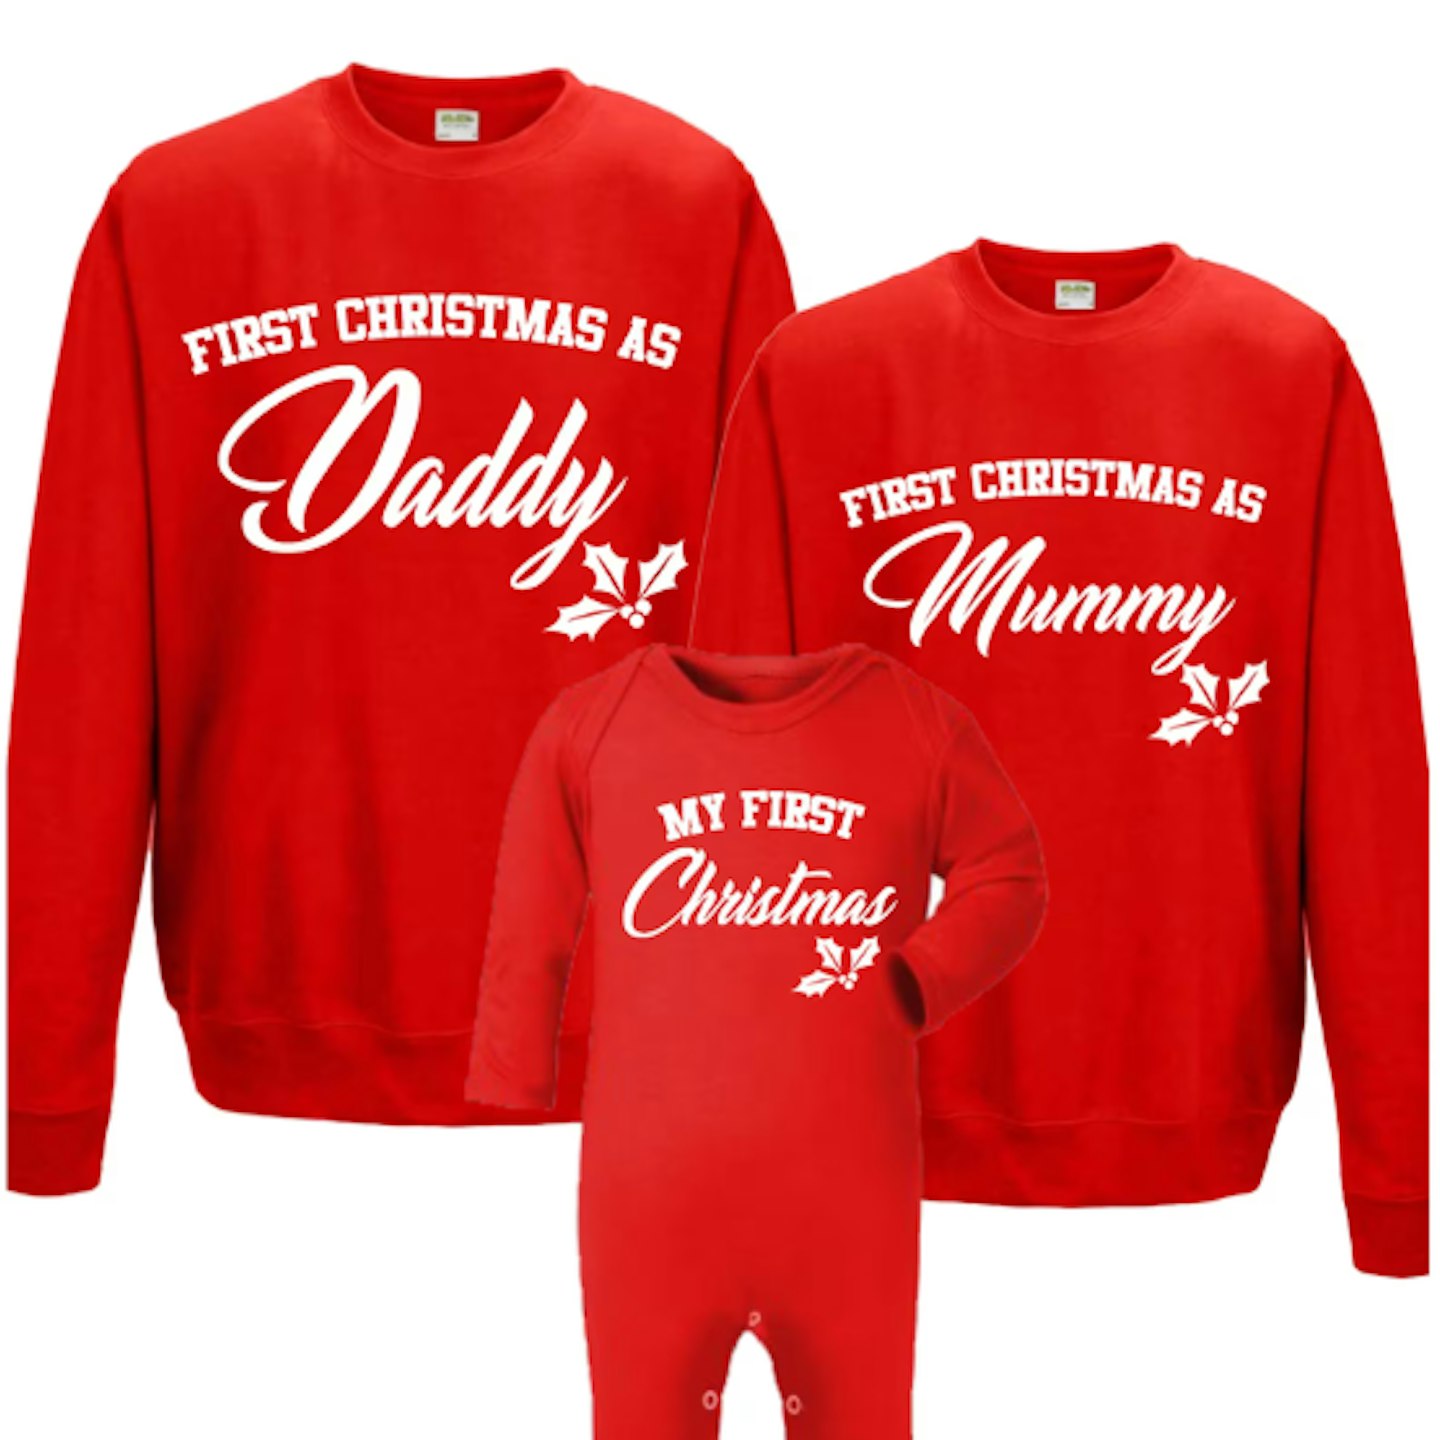 Christmas jumpers for the family baby's first Christmas